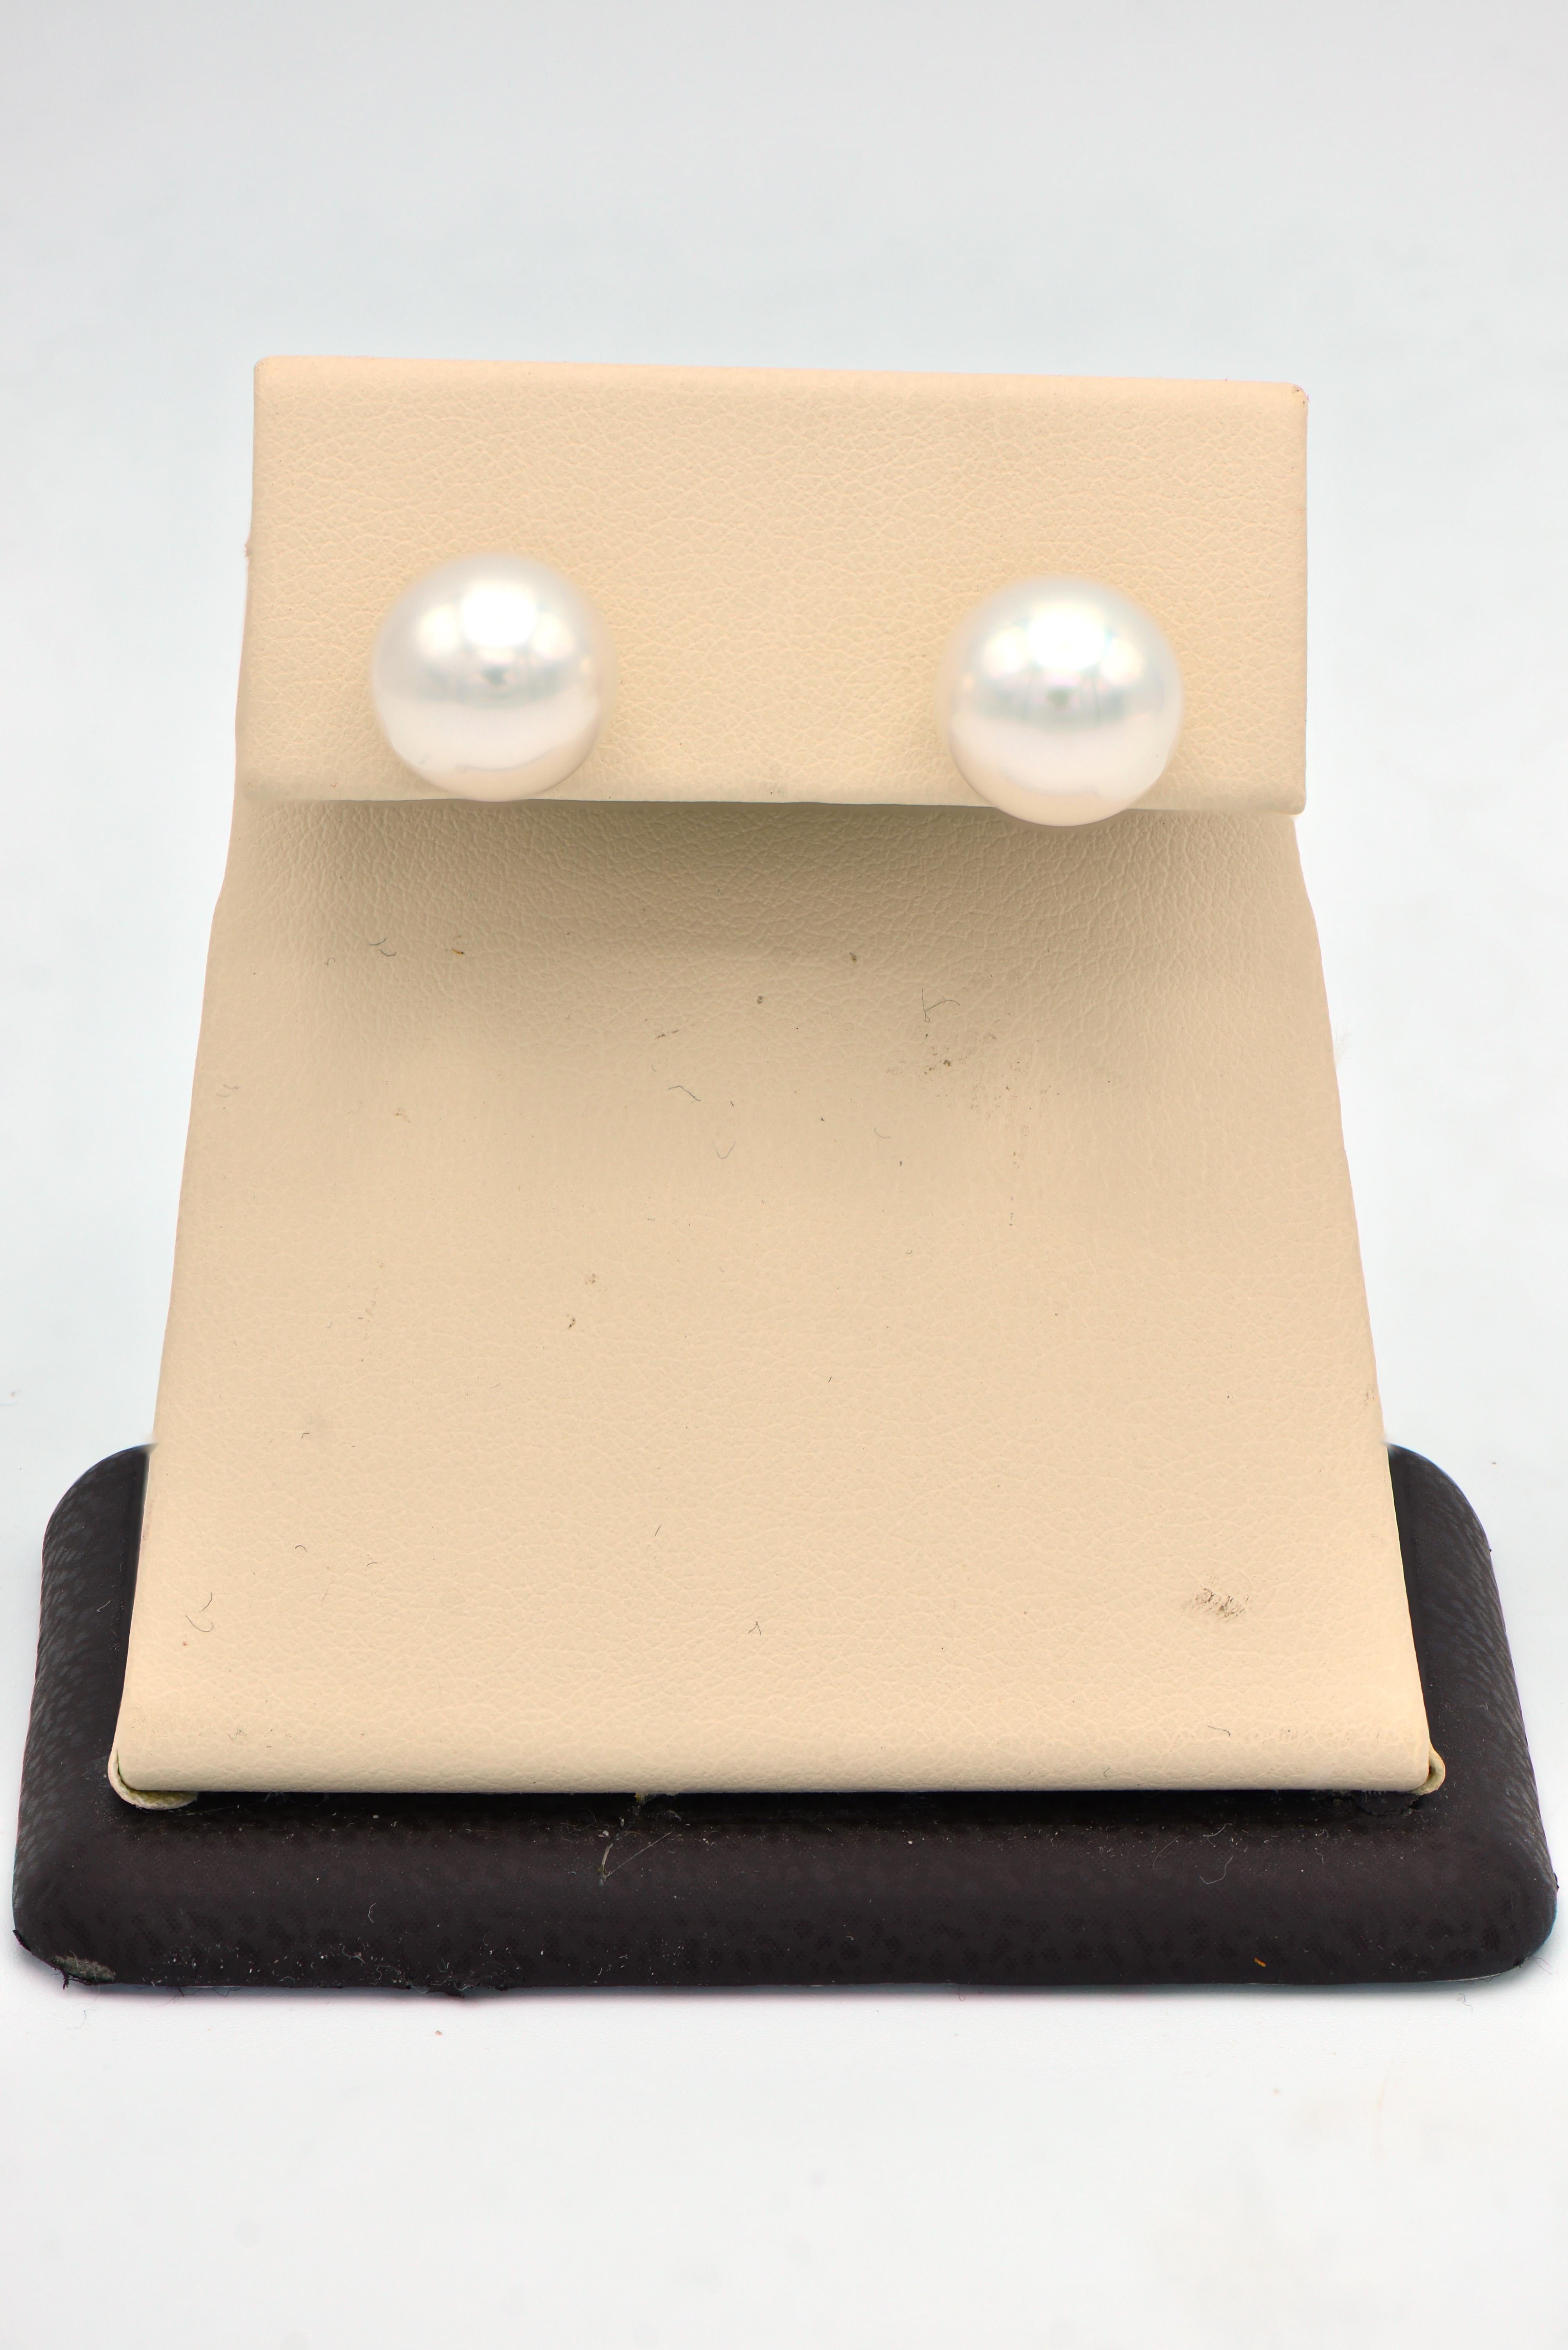 Contemporary 10-10.5mm South Sea Pearl Stud Earrings with 14 Karat White Gold Post and Backs For Sale